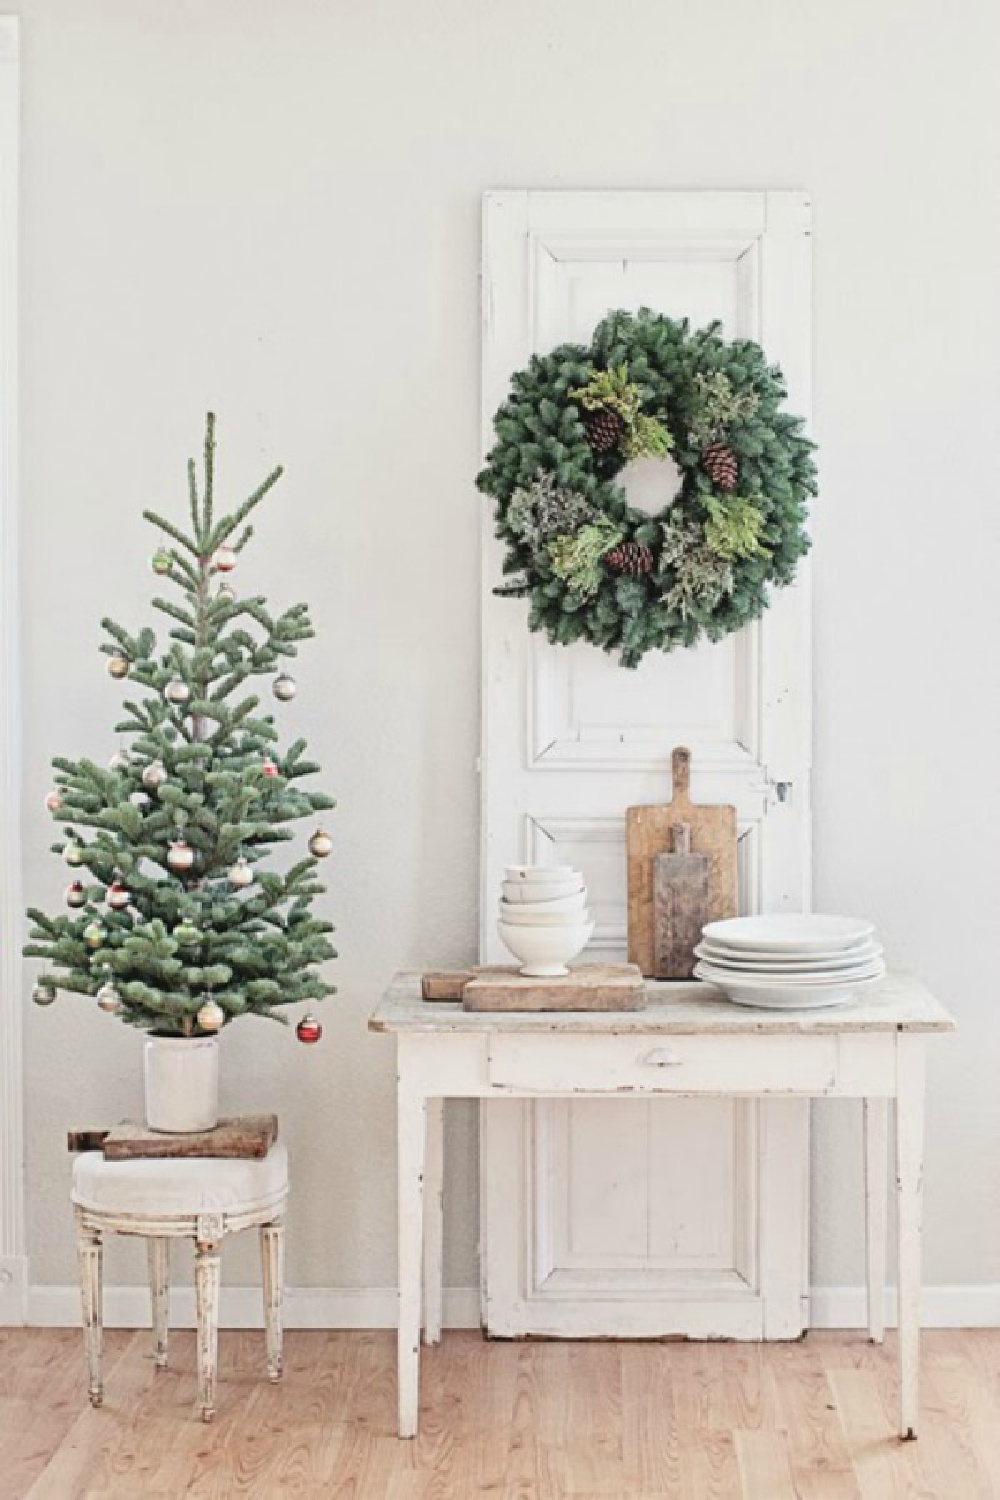 Farmhouse French Nordic Christmas decor inspiration with vintage and fresh greenery - Dreamy Whites. #dreamywhites #frenchchristmas #christmasdecor #frenchnordic #swedishchristmas